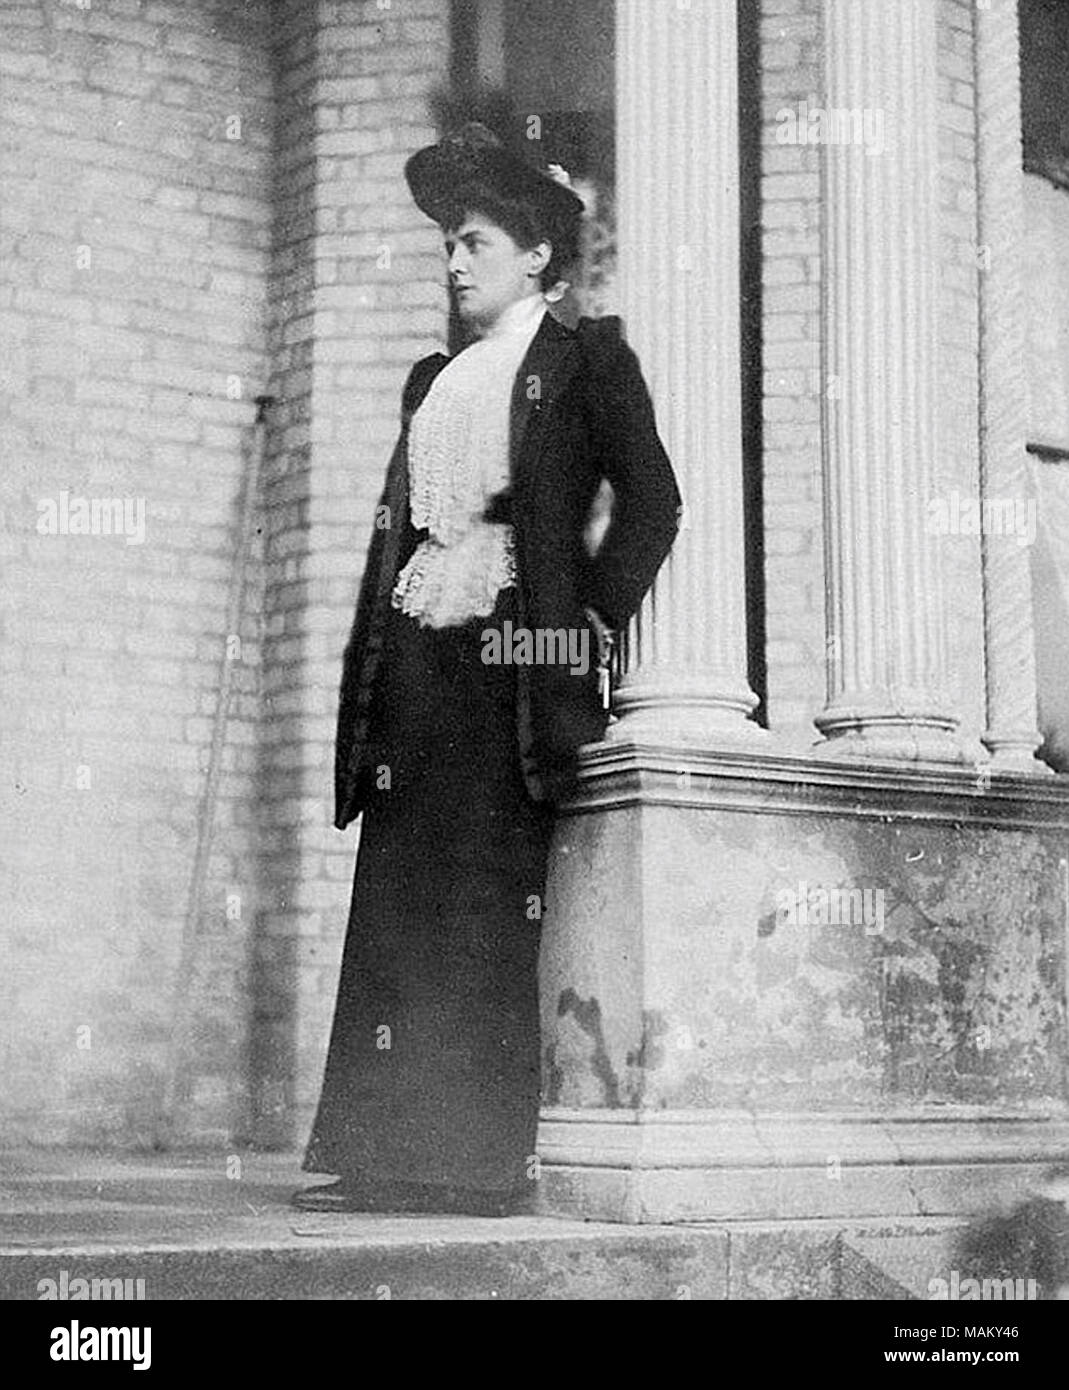 Lady Randolph Churchill in 1892, leaning on a column from the house of Lady Cornelia Baroness Wimborne (1847-1927), sister of Lord Randolph Spencer-Churchill, at Canford Magna near Bournemouth. Fran+?ais-?: Lady Randolph Churchill en 1892, appuy+?e sur une colonne de la maison de Lady Cornelia Baronne Wimborne (1847-1927), s+?ur de Lord Randolph Spencer-Churchill, +? Canford Magna pr+?s de Bournemouth.  . 1892. Stock Photo